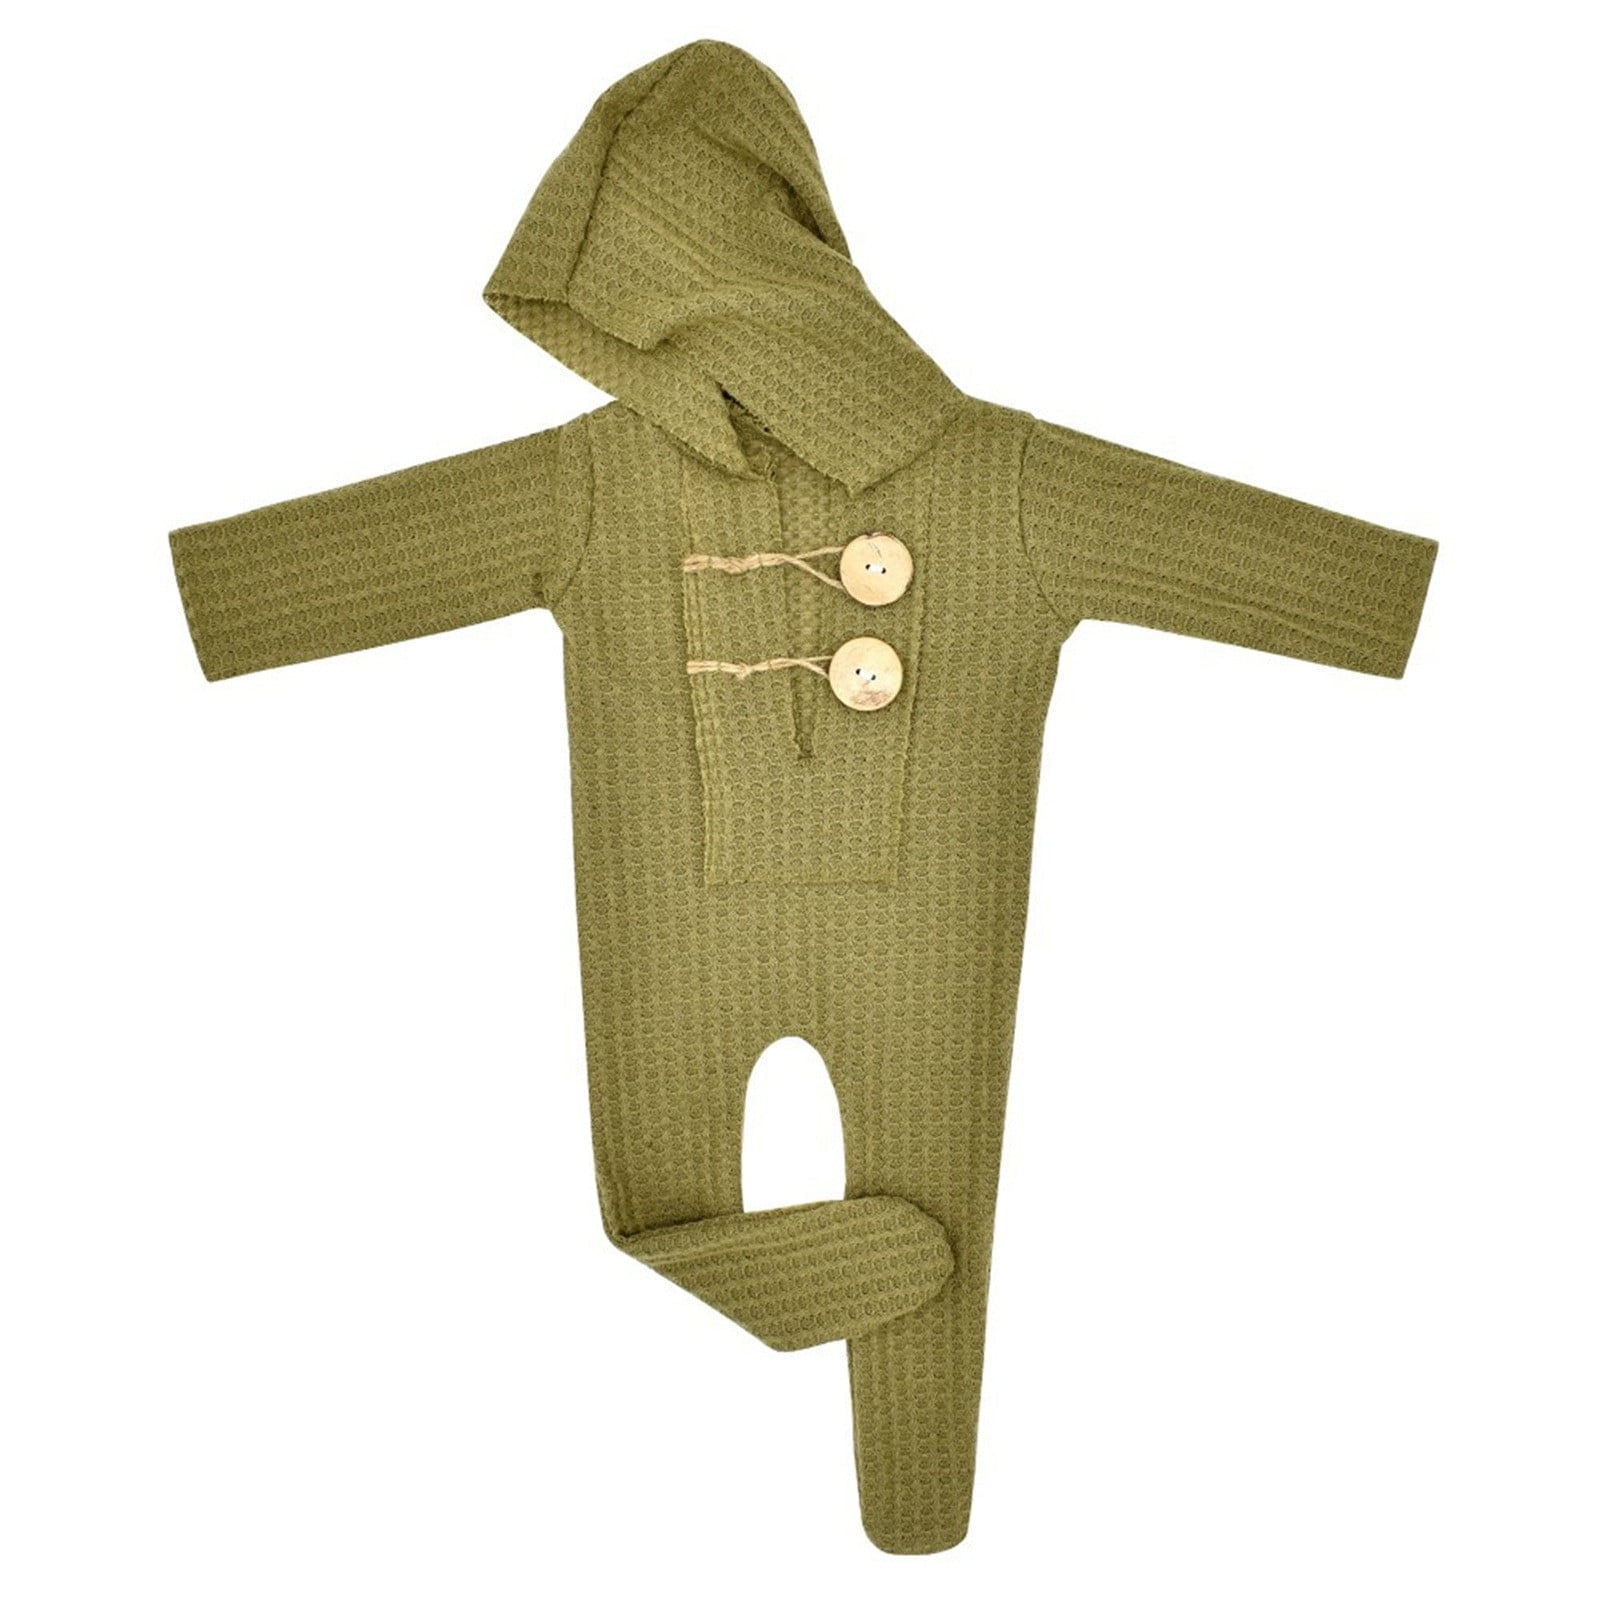 Newborn Baby Solid Short Sleeve Knitted Hooded Romper Photography Prop Deluxe